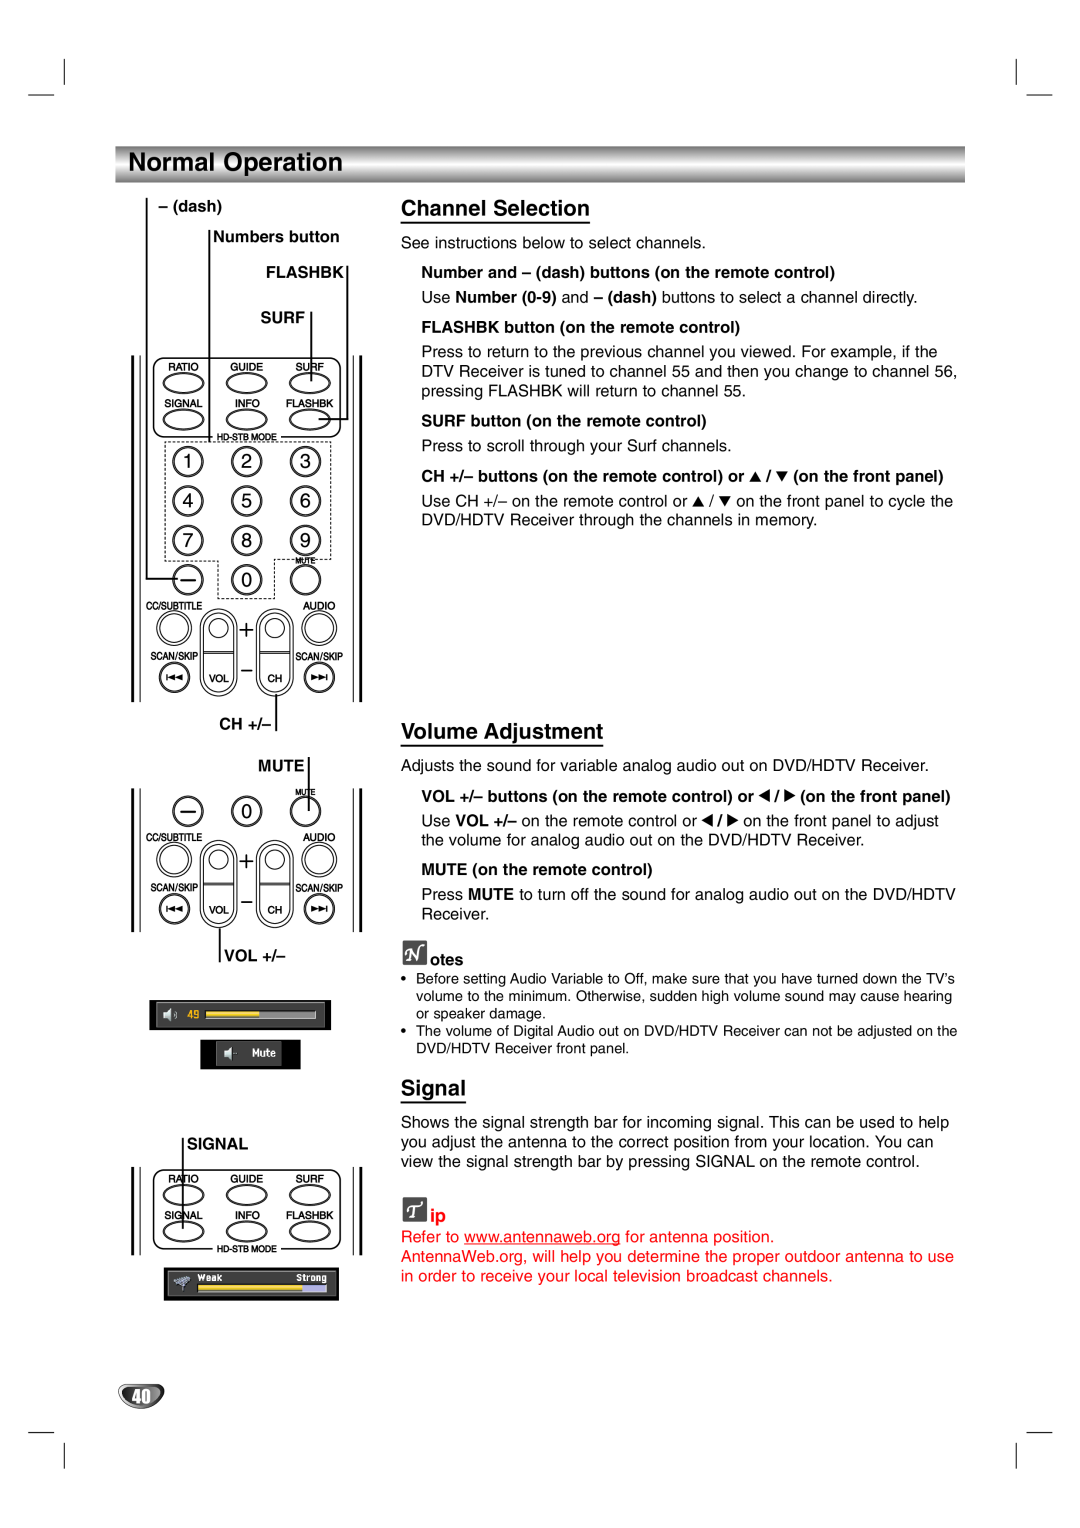 LG Electronics LST-3510A owner manual Normal Operation, Channel Selection, Volume Adjustment, Signal 